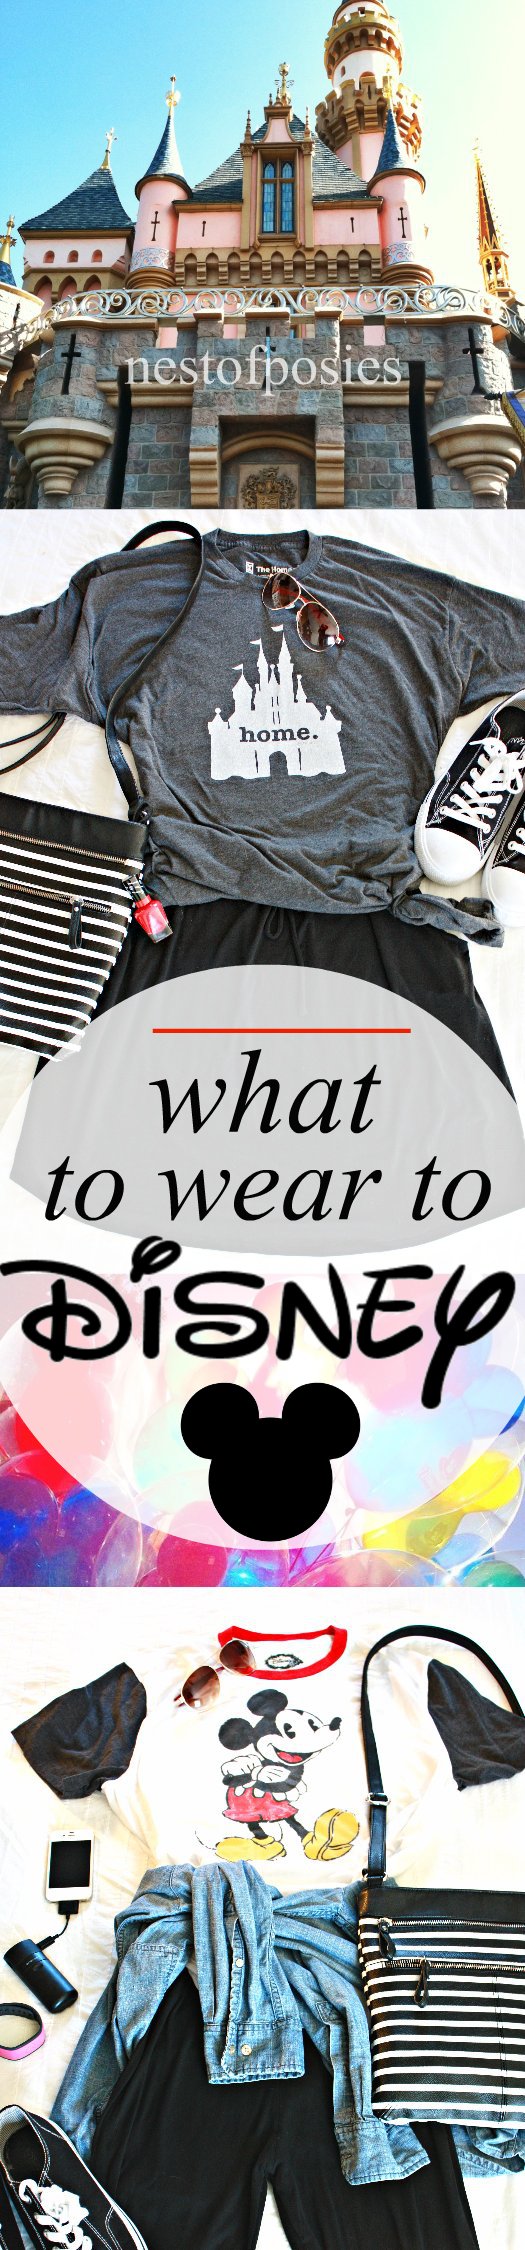 what-to-wear-to-disney-2